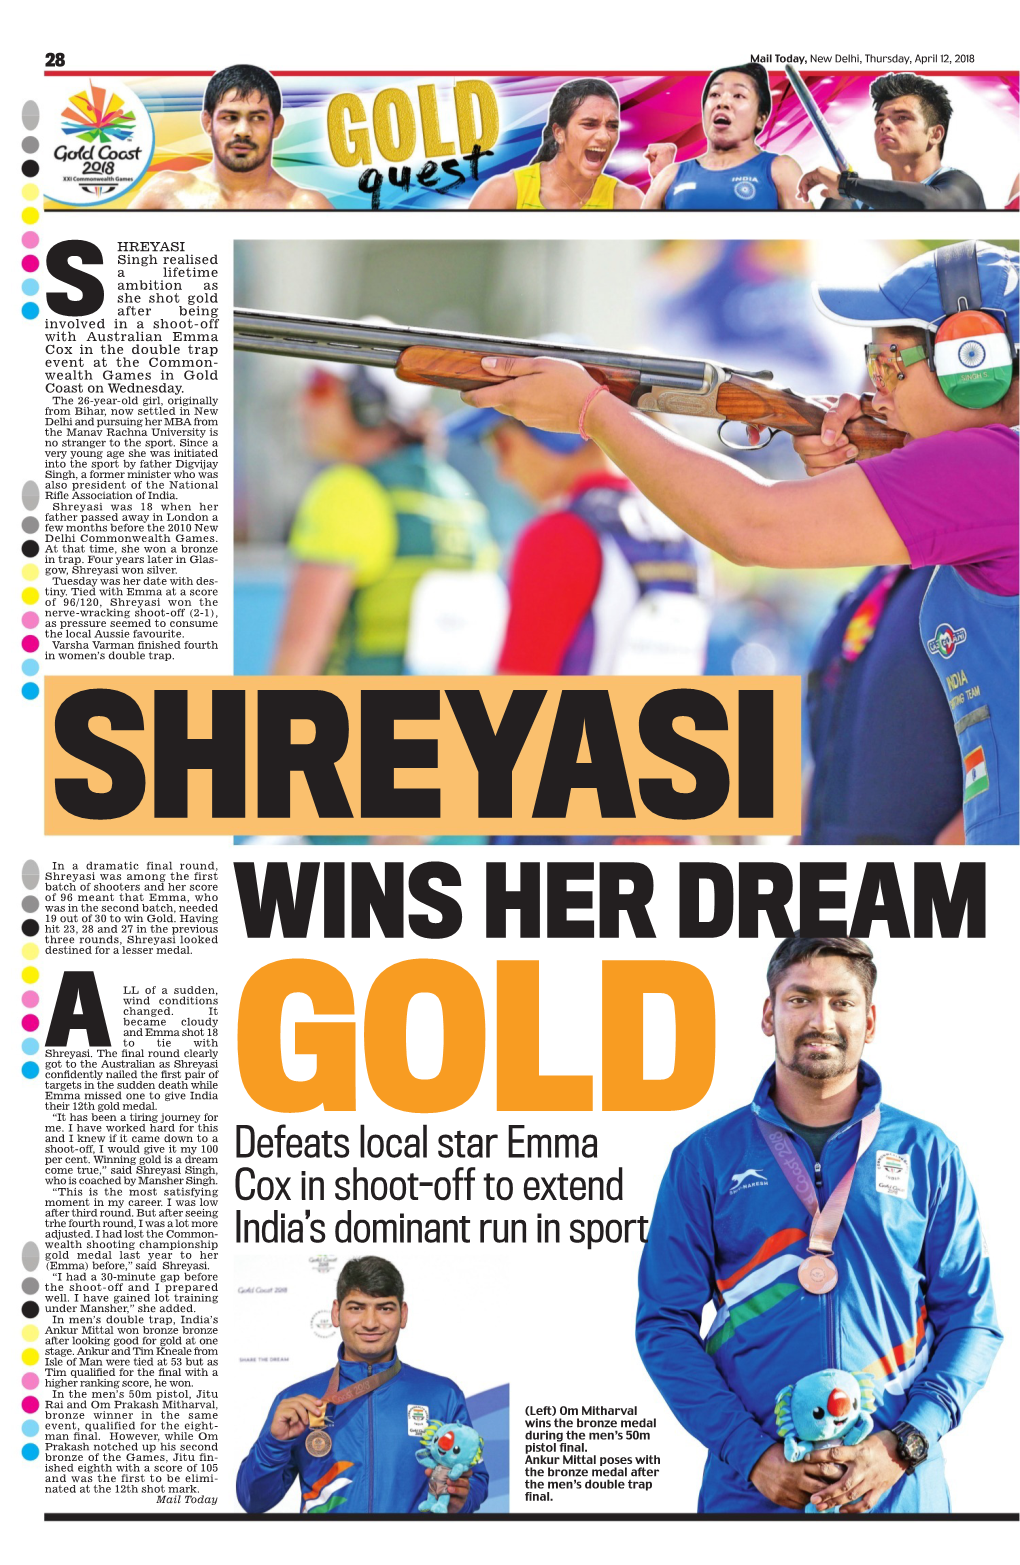 Defeats Local Star Emma Cox in Shoot-Off to Extend India's Dominant Run in Sport